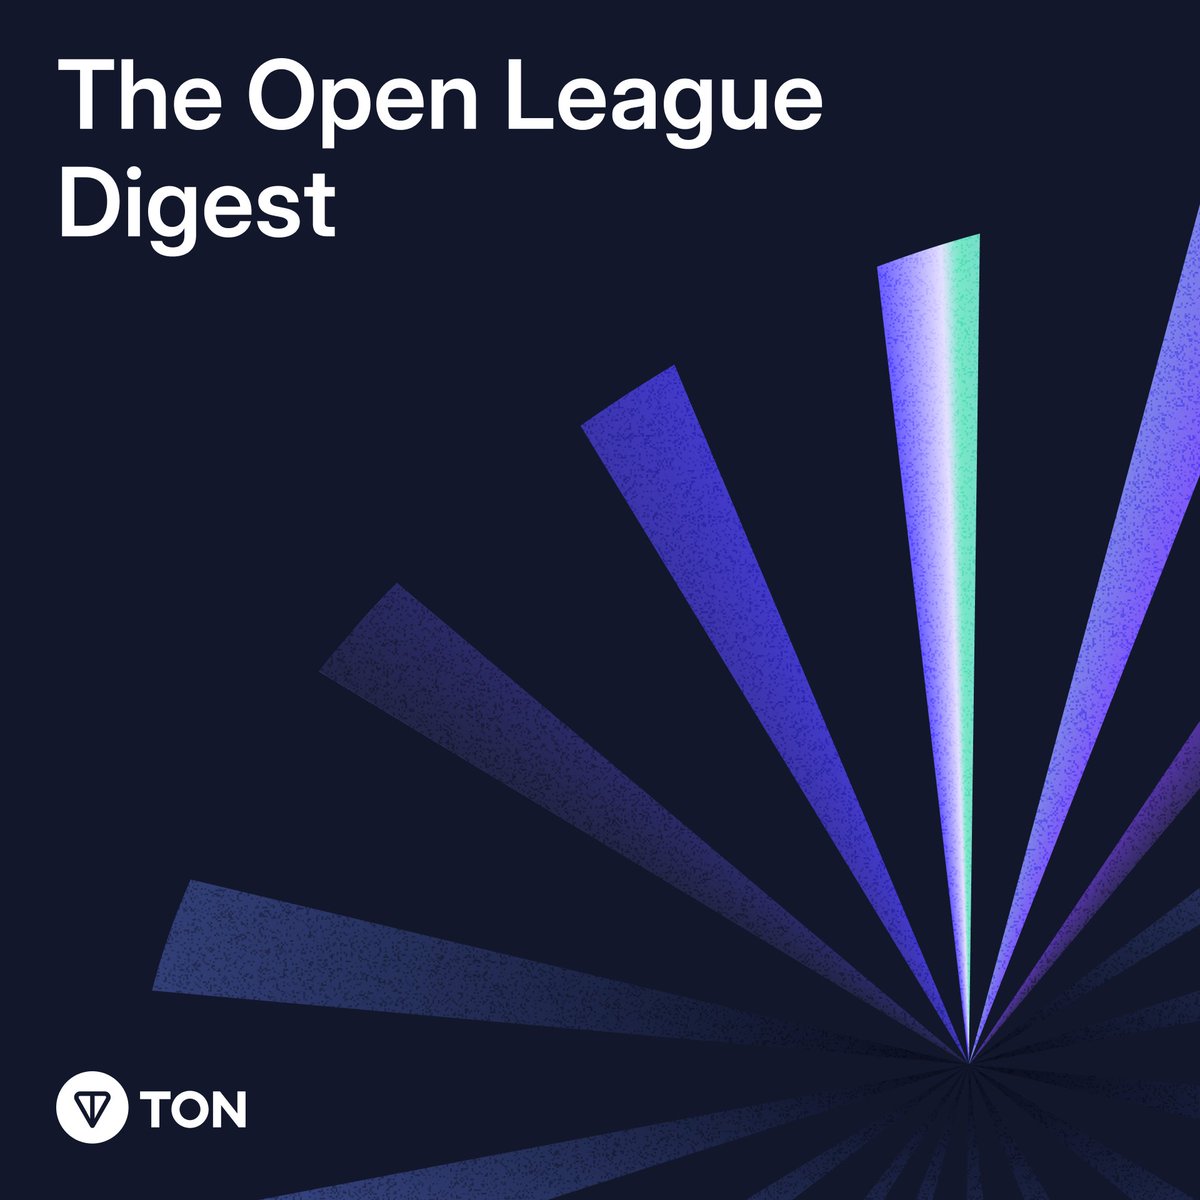 The Open League Digest ☕️📖 $USDt on #TON reaches 200M in circulation, Open League Summer - 13 IRL Bootcamps across 13 cities, @TONOpenLeague Season 3 launch, results for Season 2, and much more! More details ⬇️ t.me/league